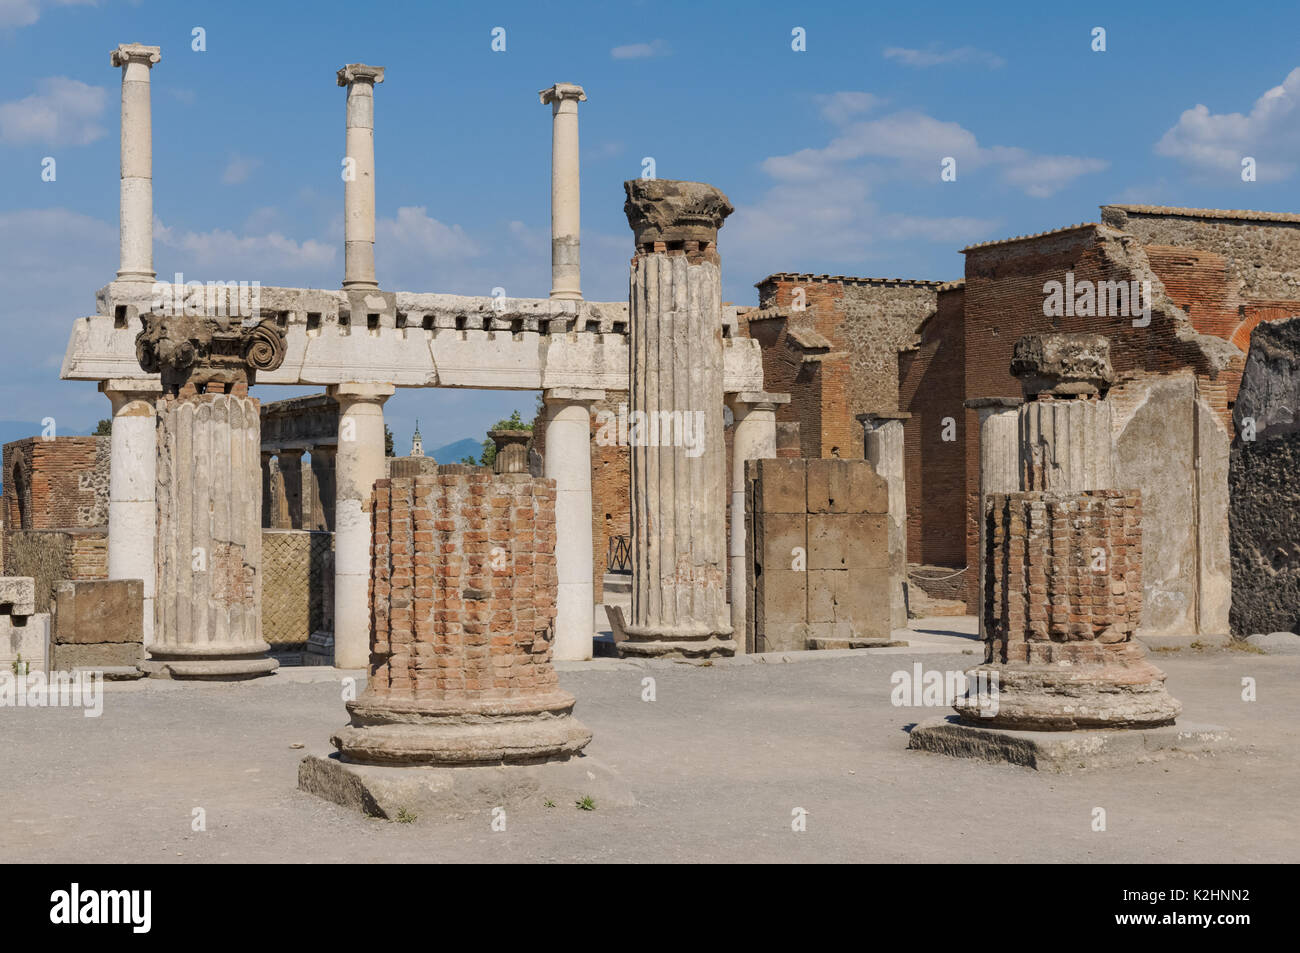 Remains of the Basilica at the Roman ruins of Pompeii, Italy Stock Photo